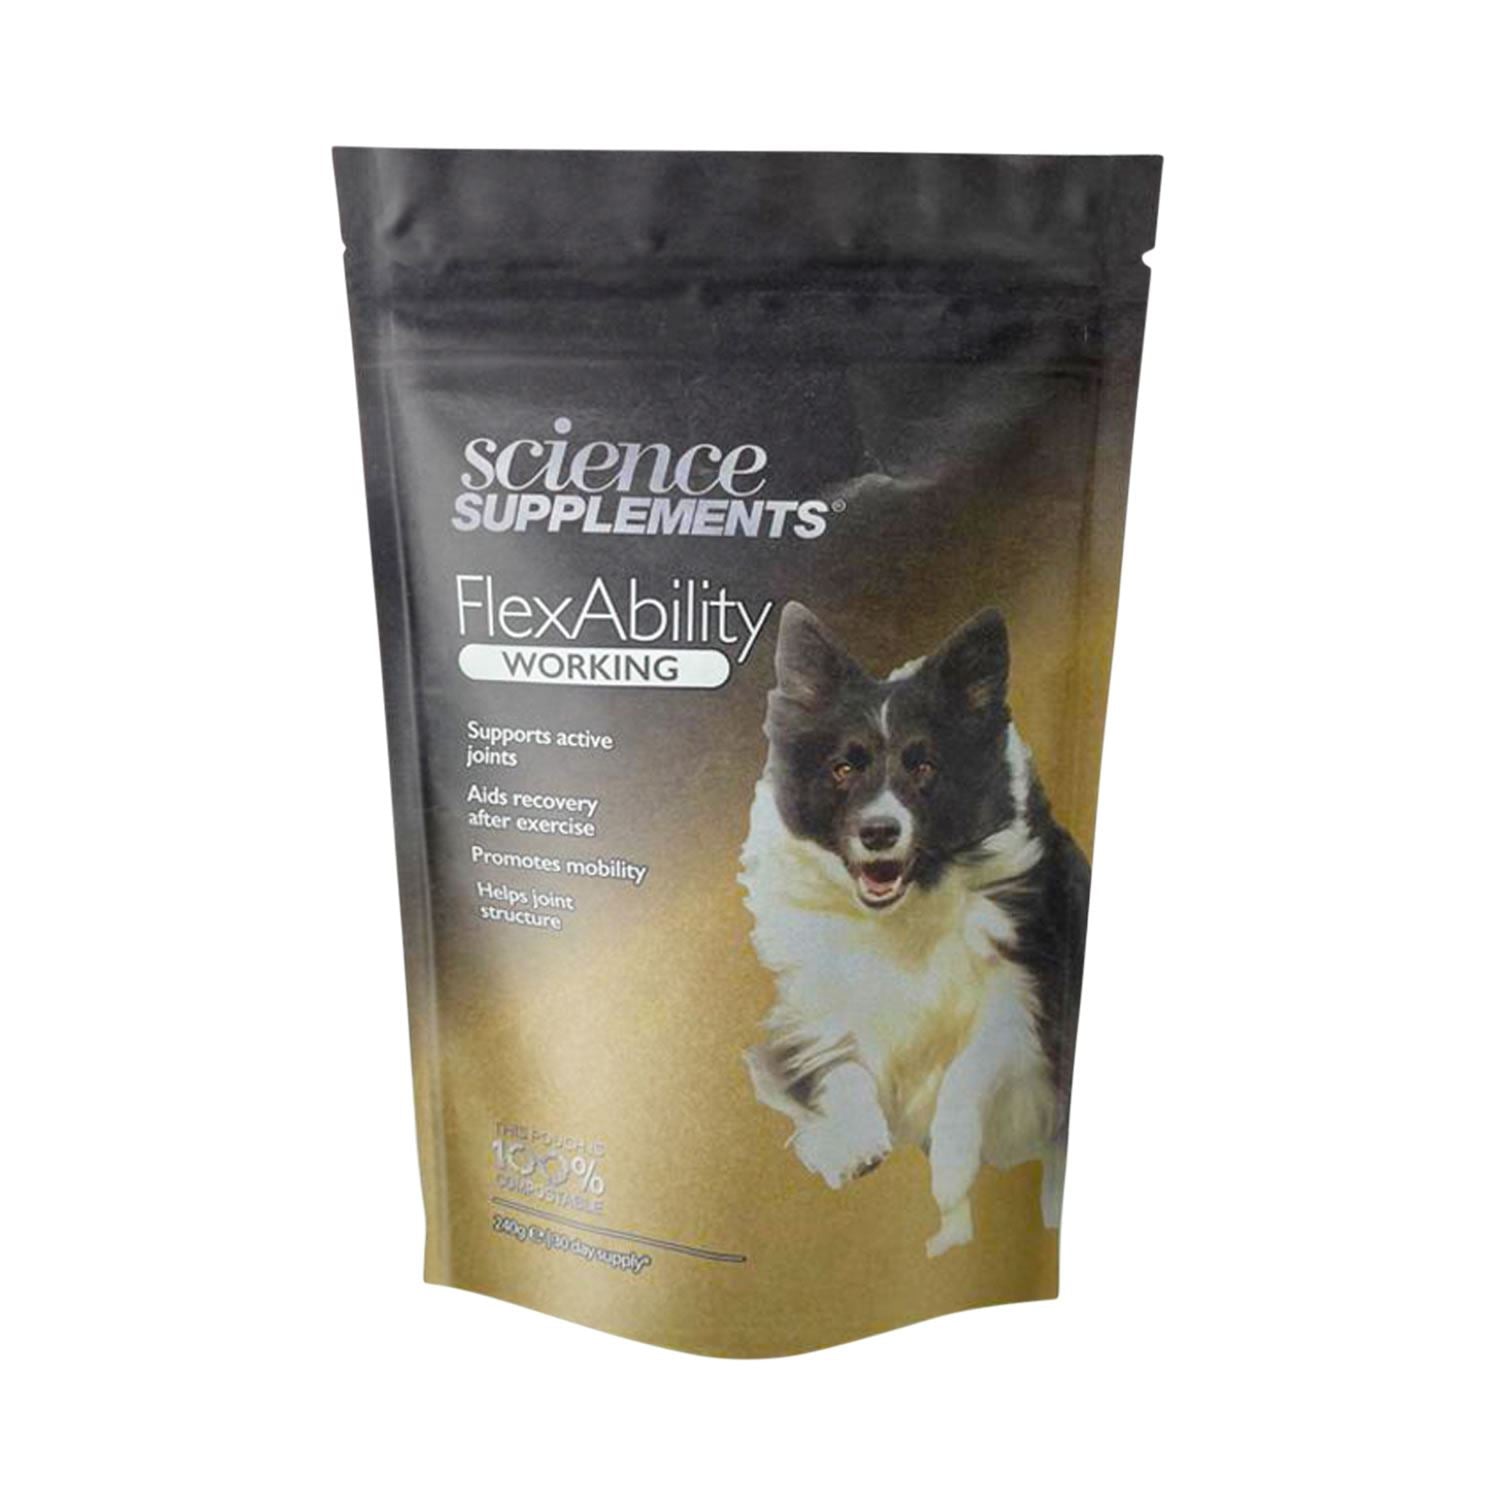 Science Supplements Flexability Working K9 - Just Horse Riders